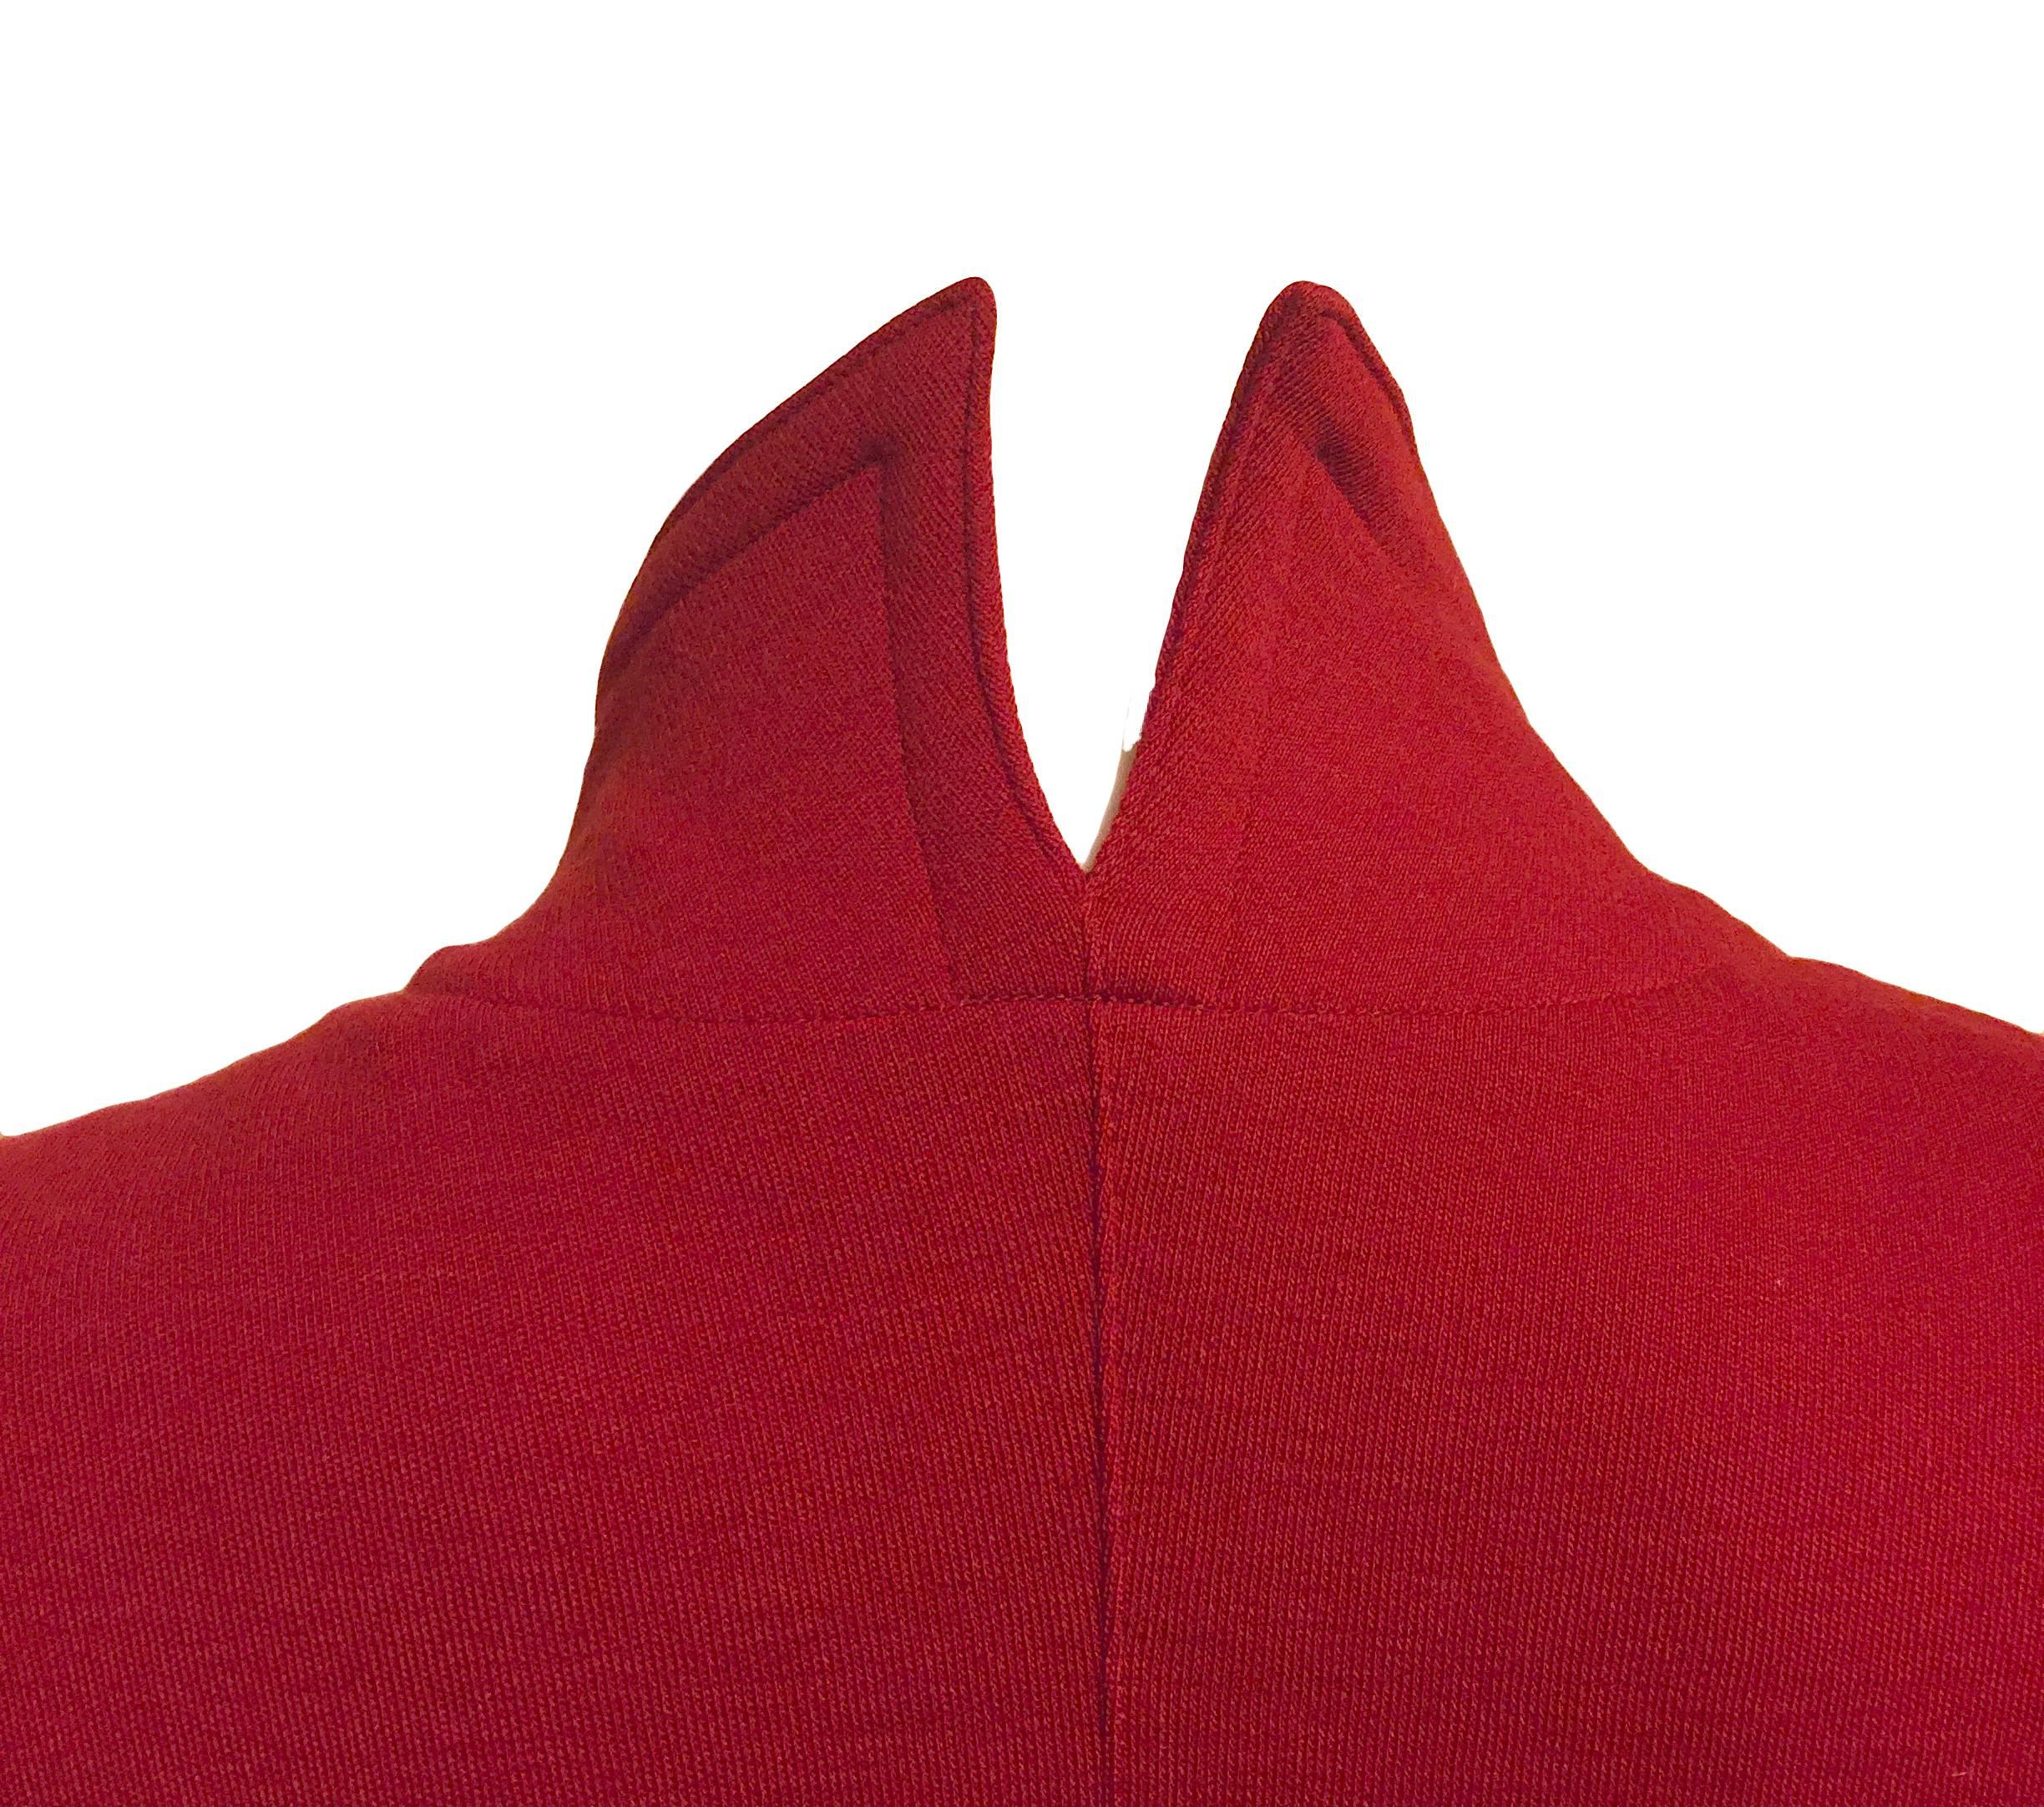 Claude Montana Red Wool Dress, 1980s For Sale 1